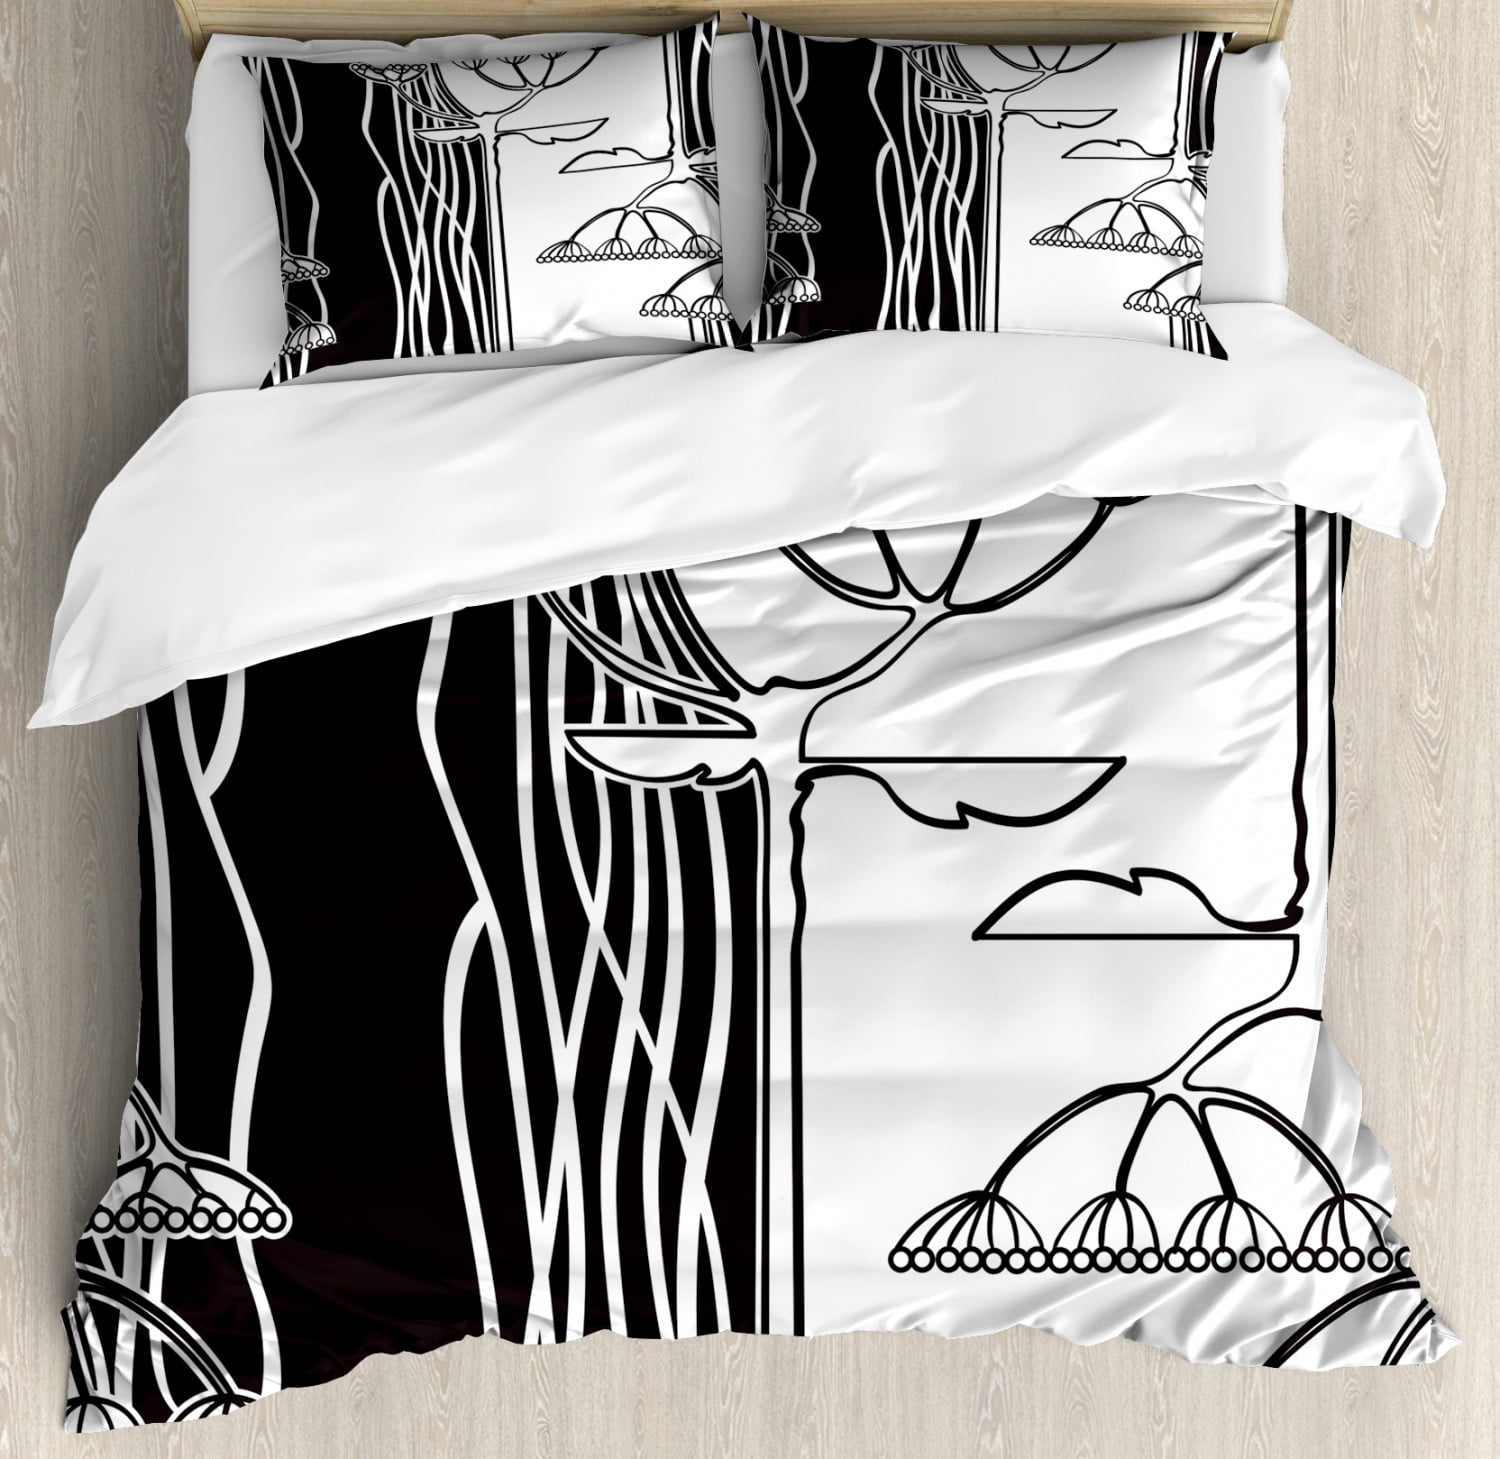 Black And White King Size Duvet Cover Set Abstract Fennel Plants